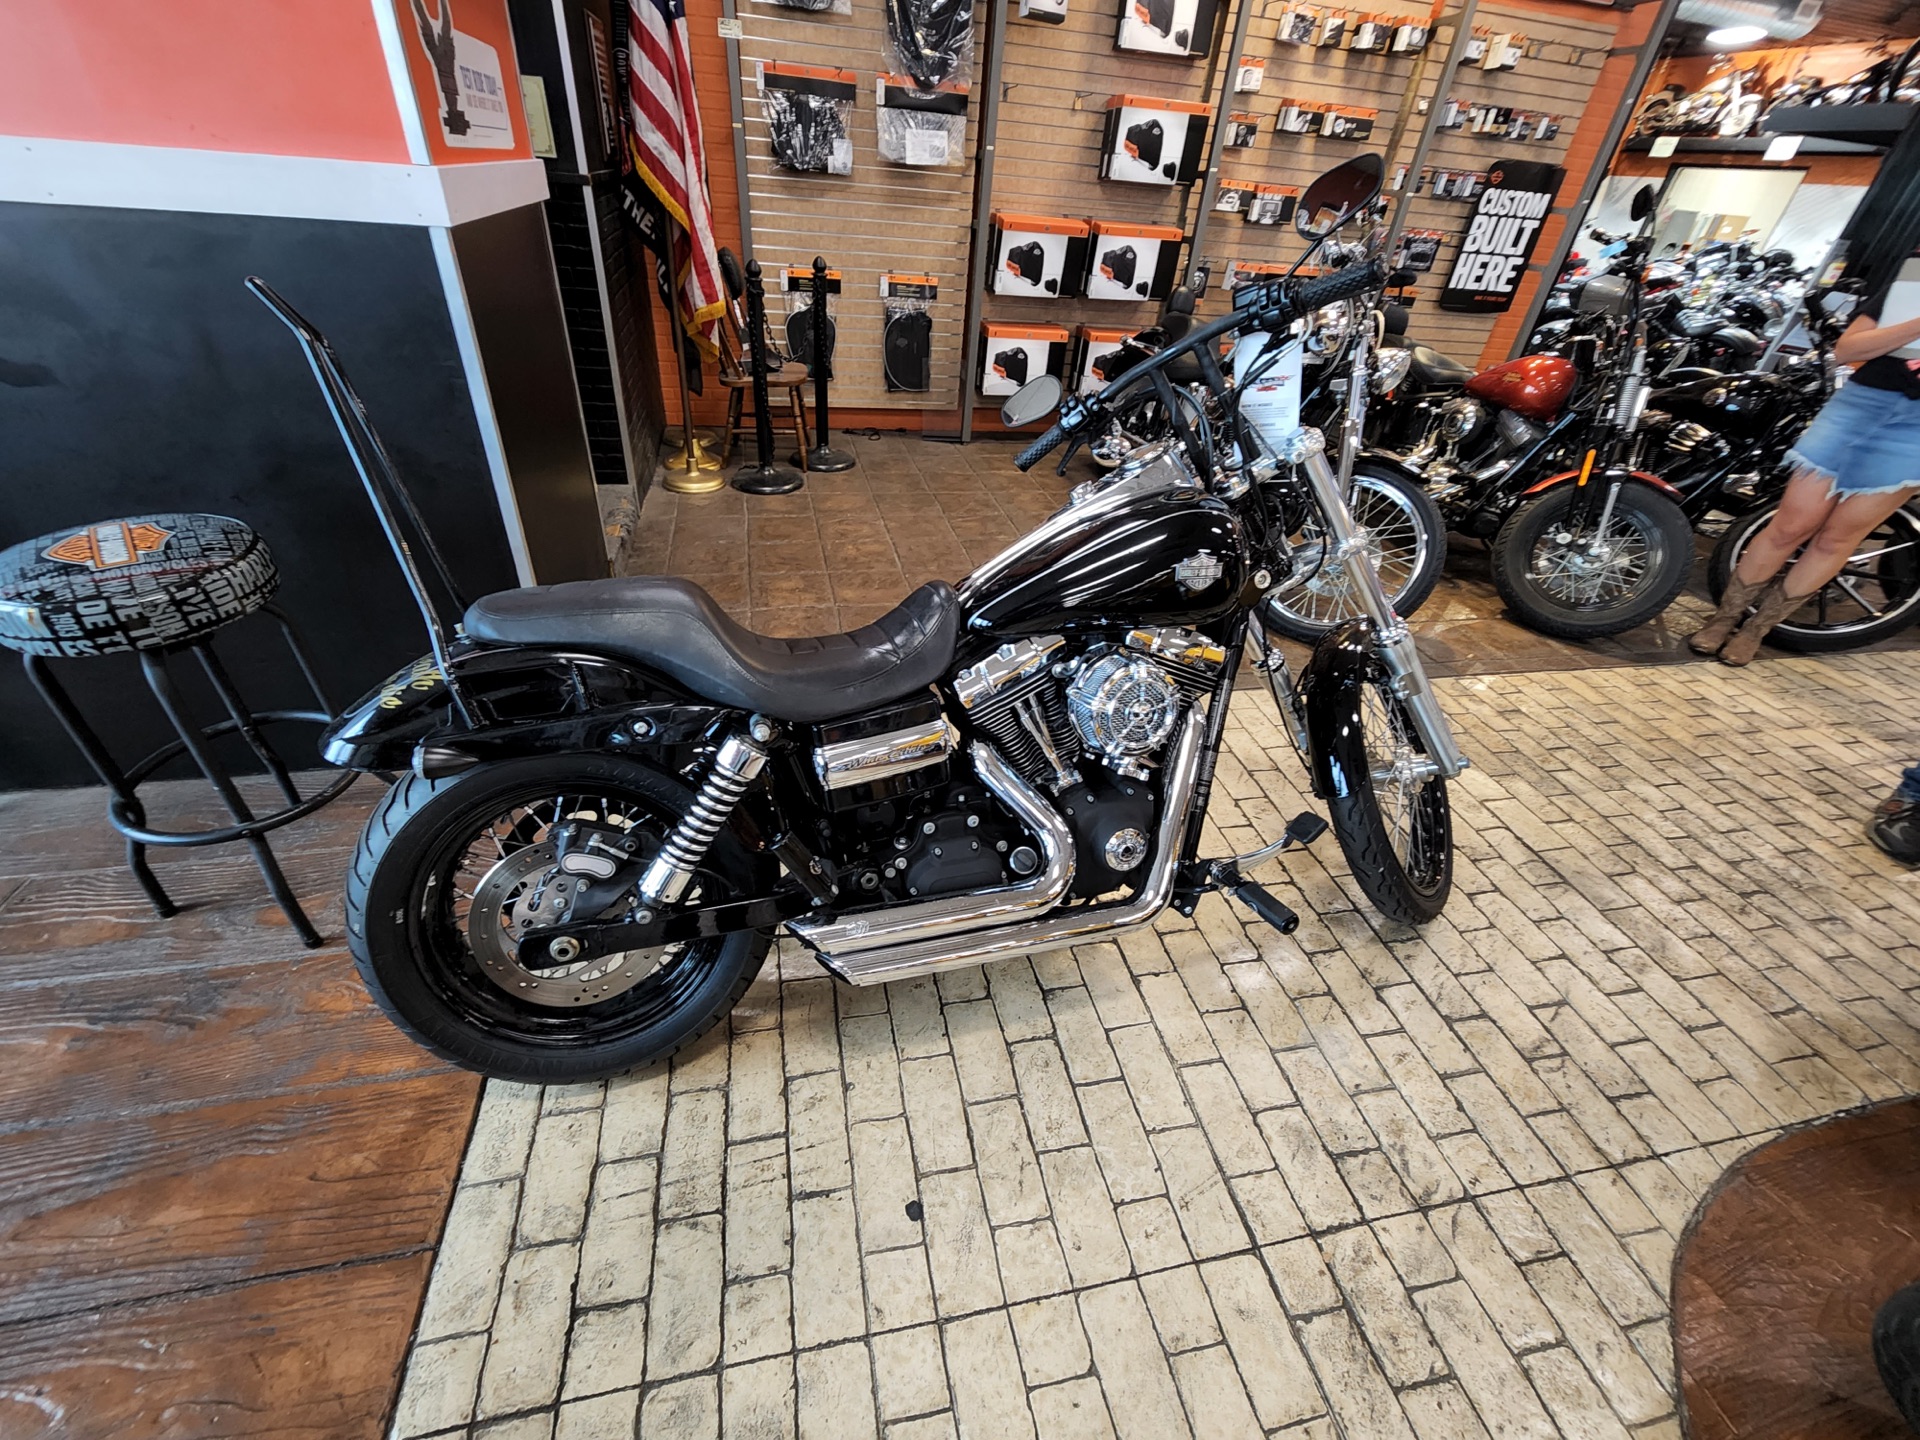 2013 Harley-Davidson FXDWG 103 Dyna Wide Glide in Marion, Illinois - Photo 1